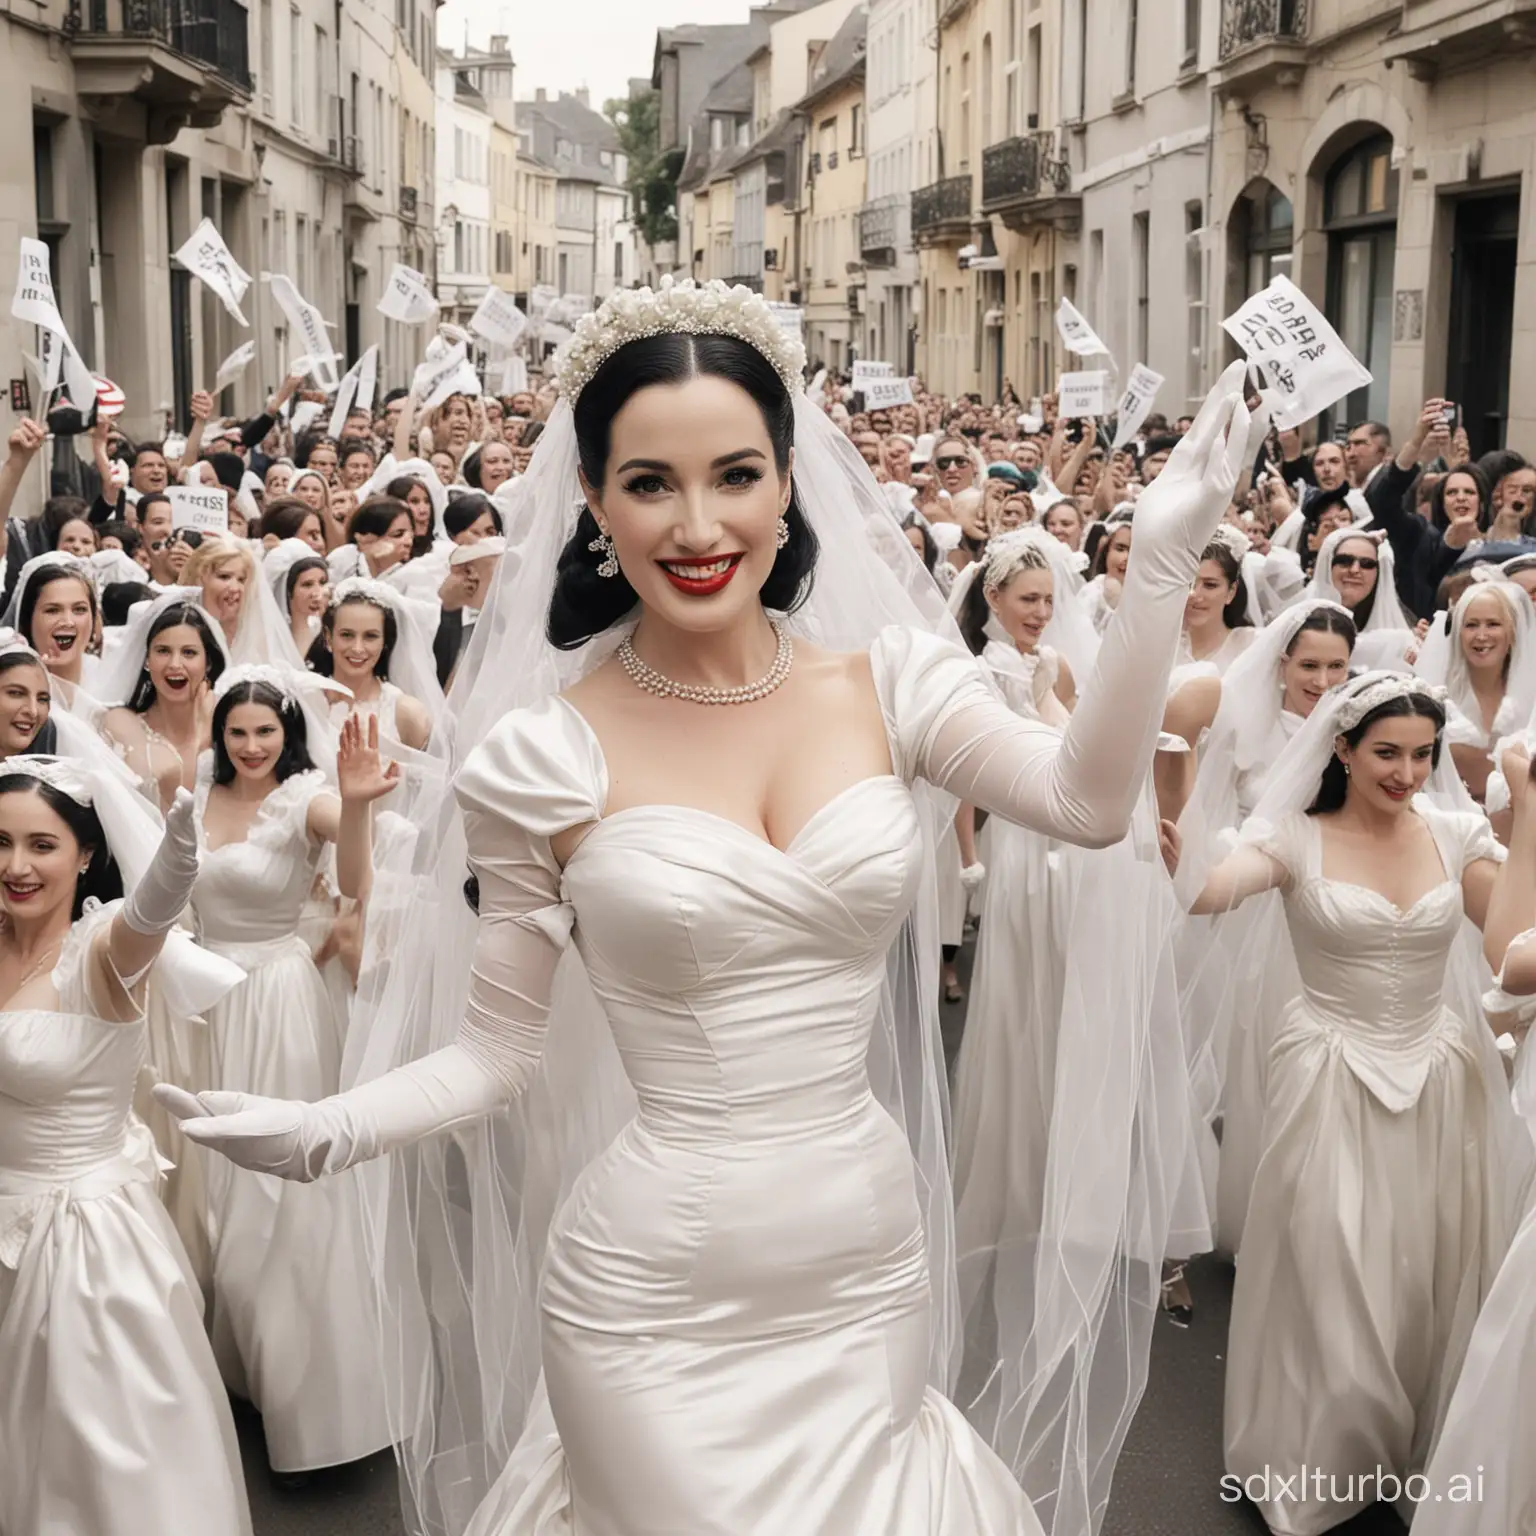 Campaign-Supporters-Dressed-as-Brides-Promoting-Candidate-Dita-Von-Tesse